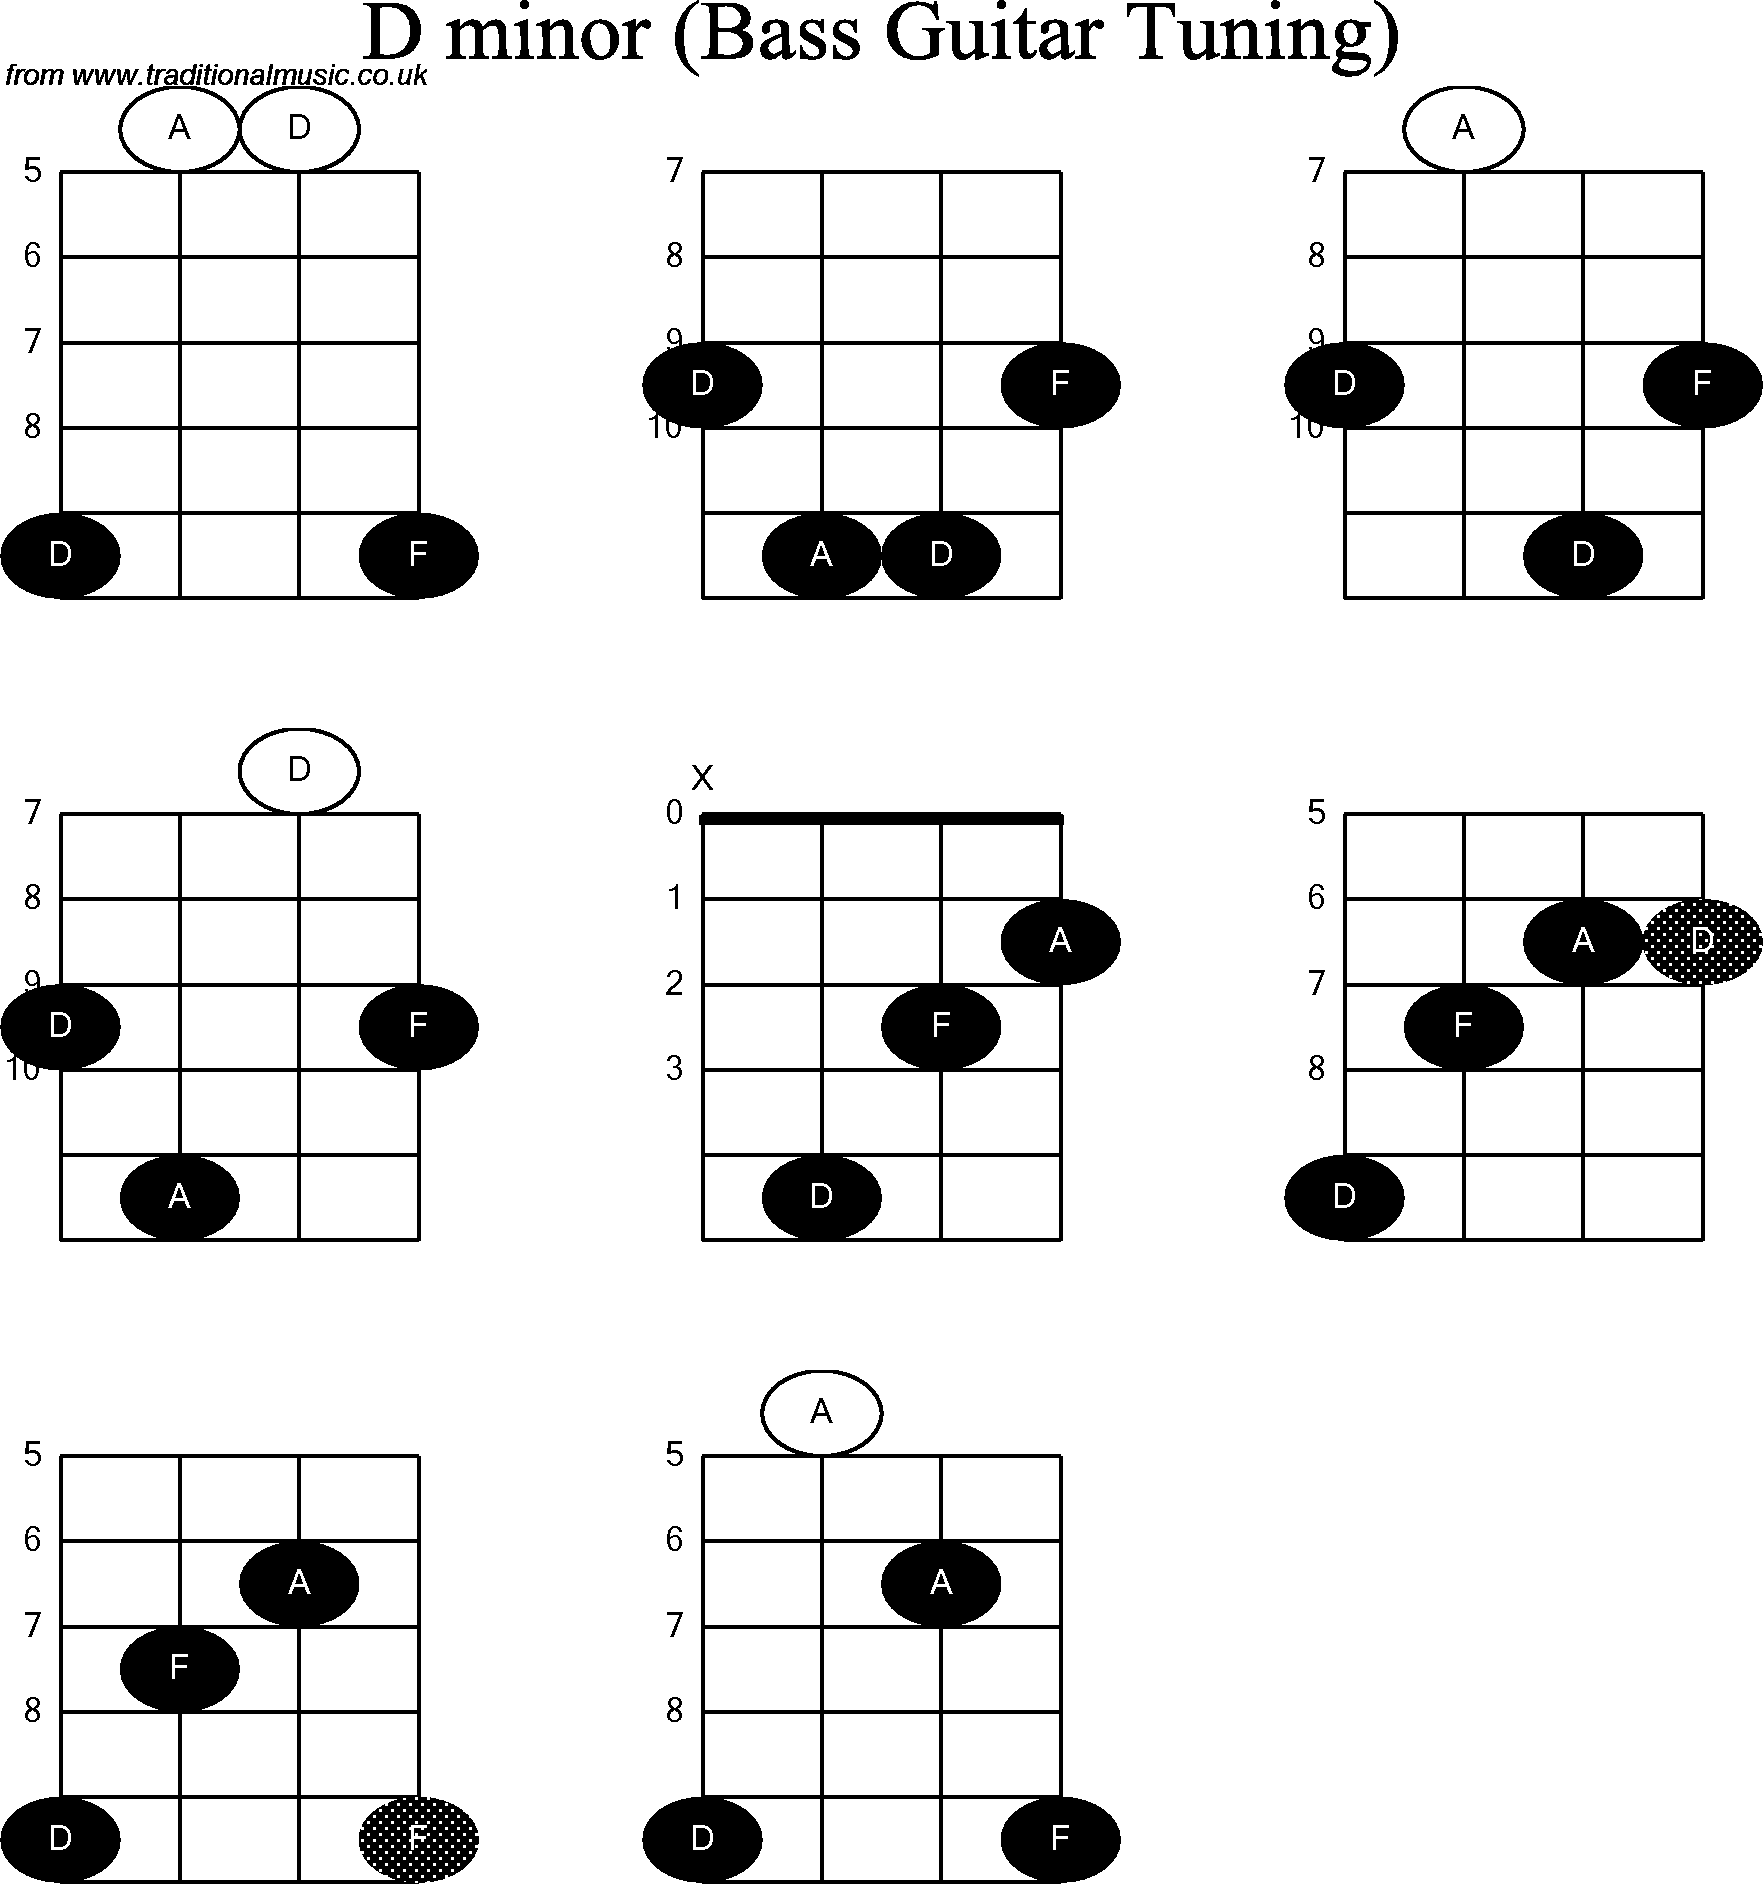 Bass Guitar chord charts for: D Minor